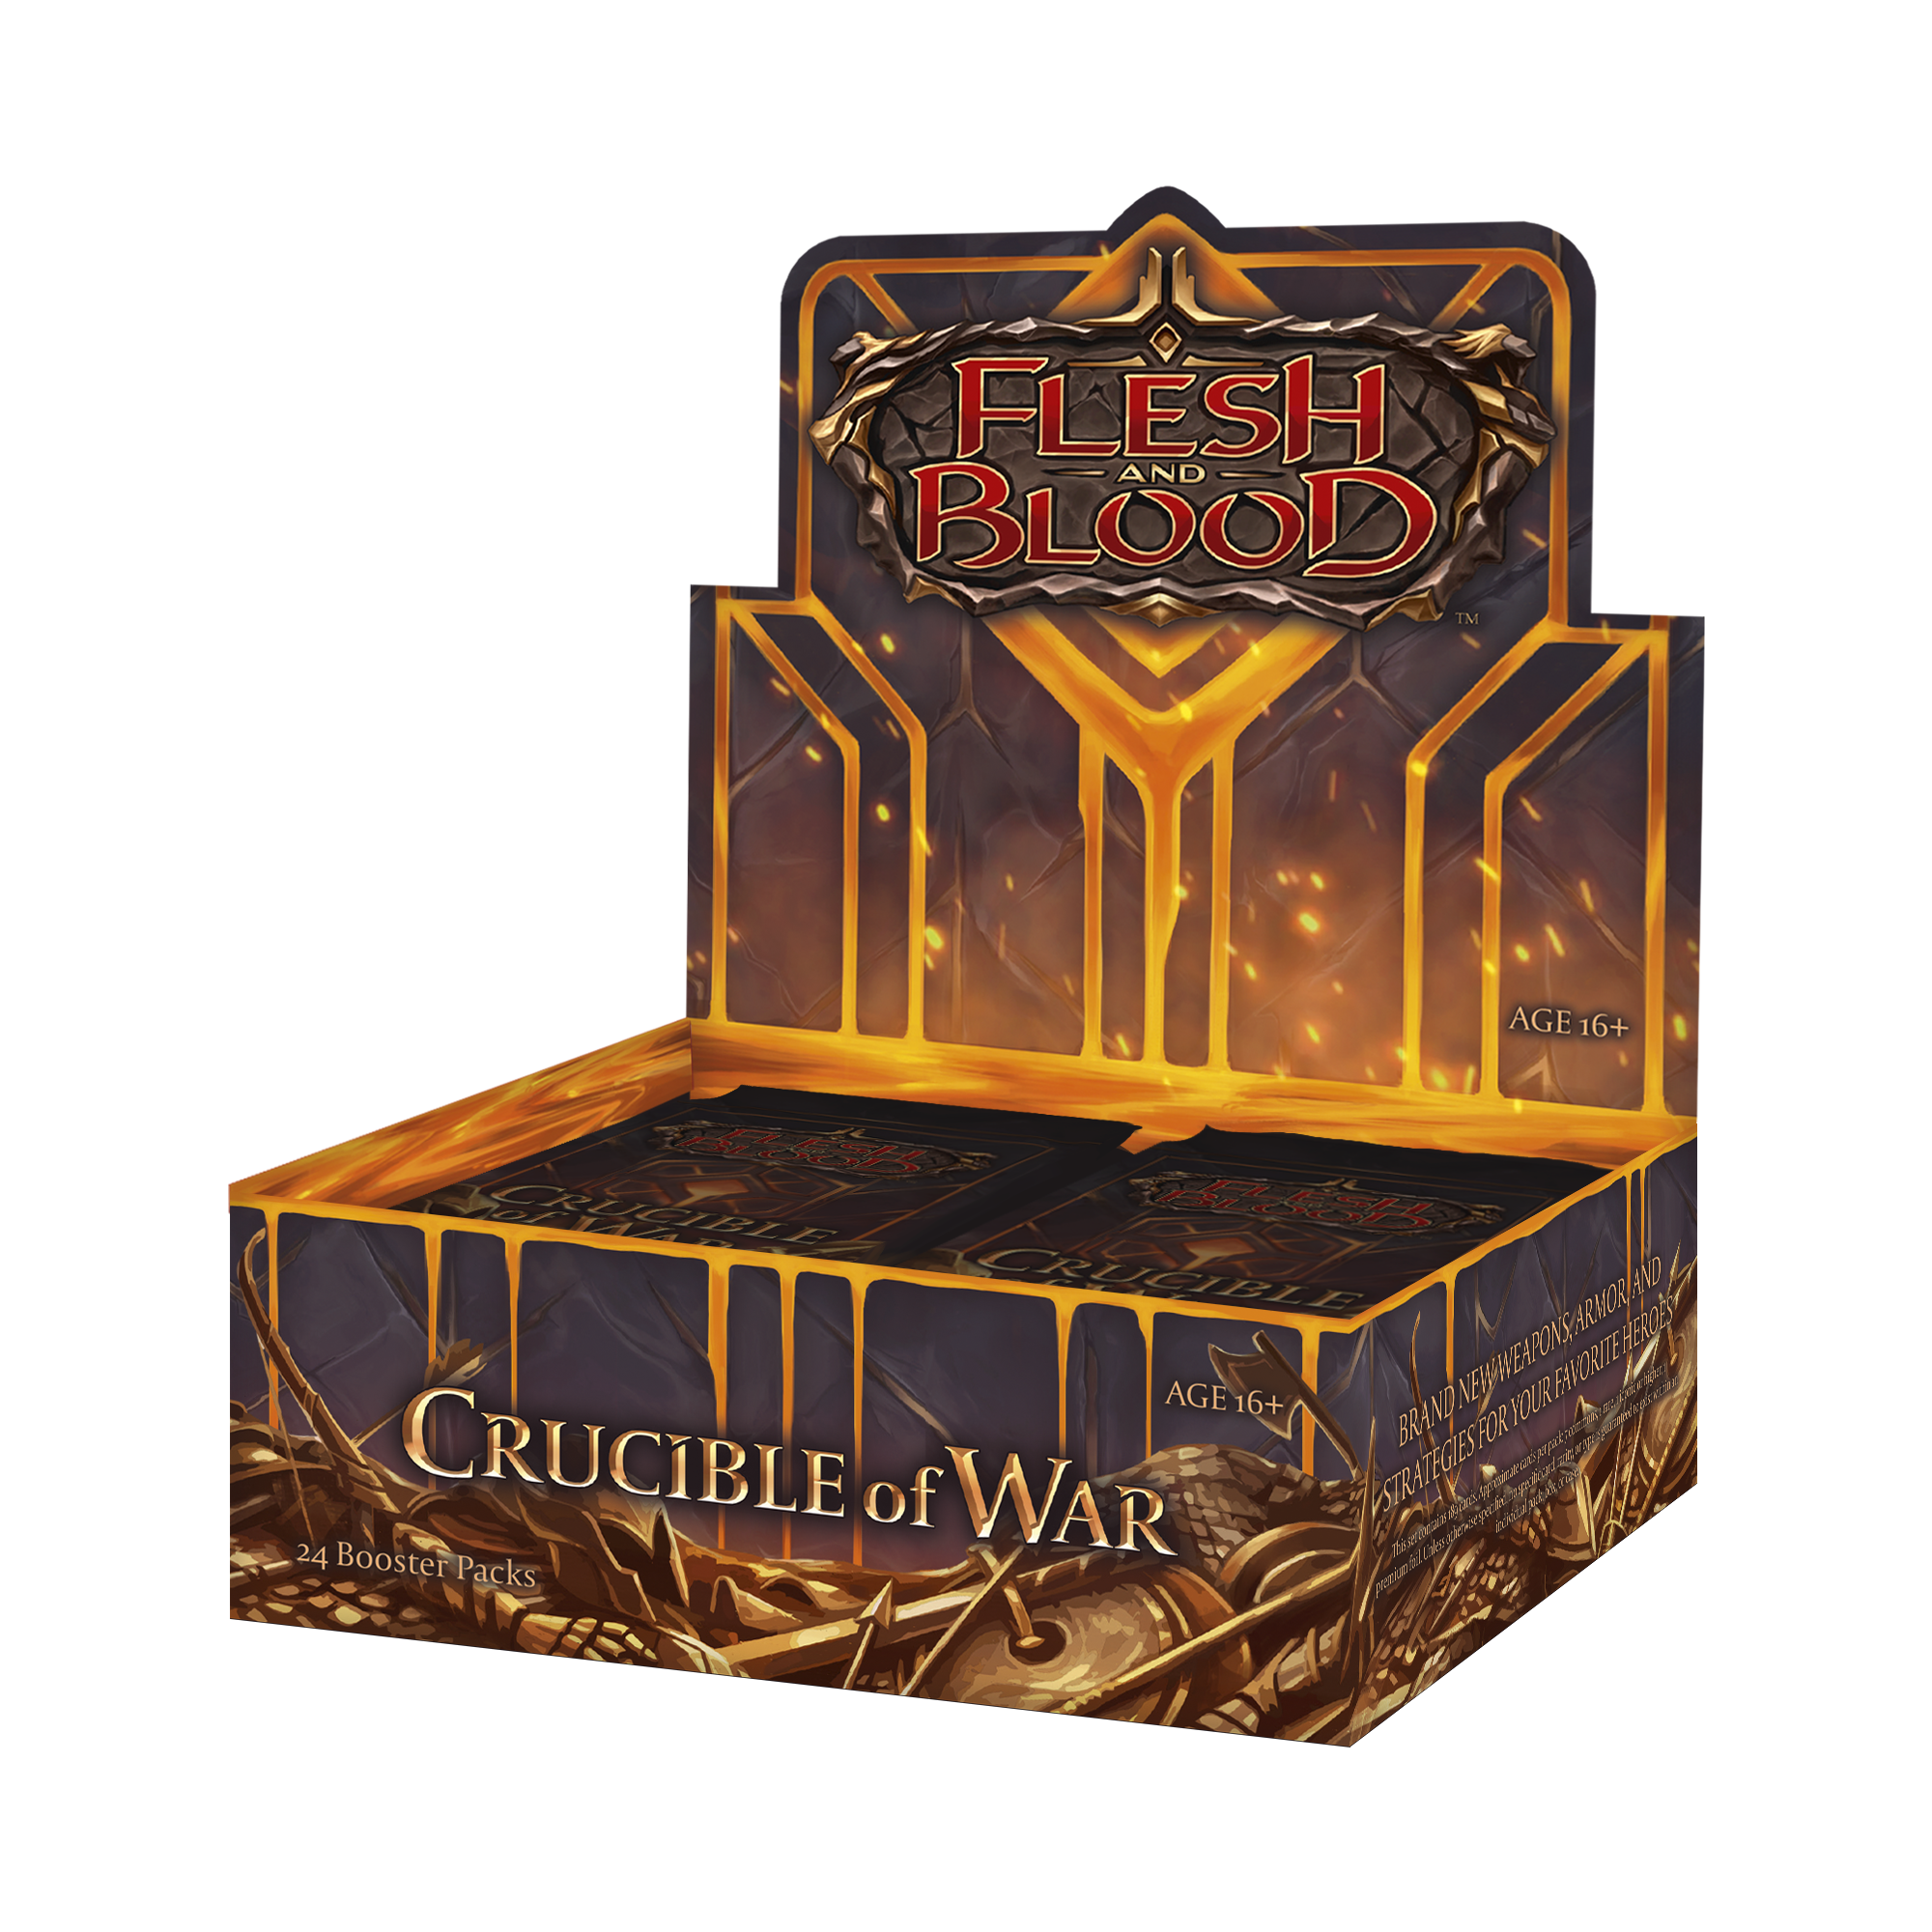 Flesh and Blood - Crucible of War (1st Edition) Booster Box